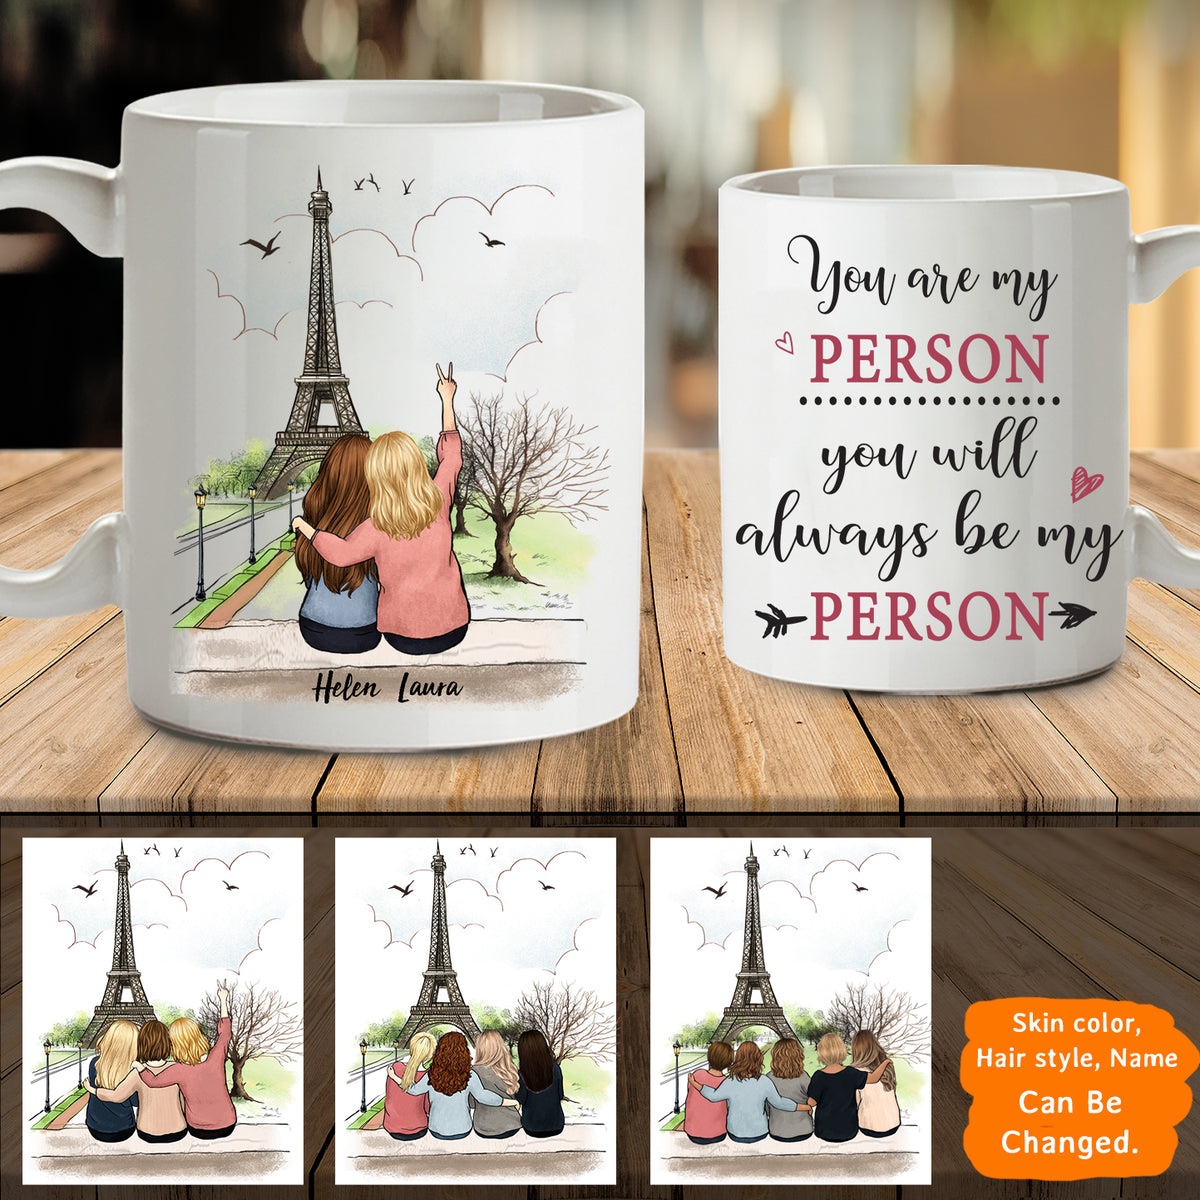 Personalized Best Friend Coffee Mug - meaningful quote 3